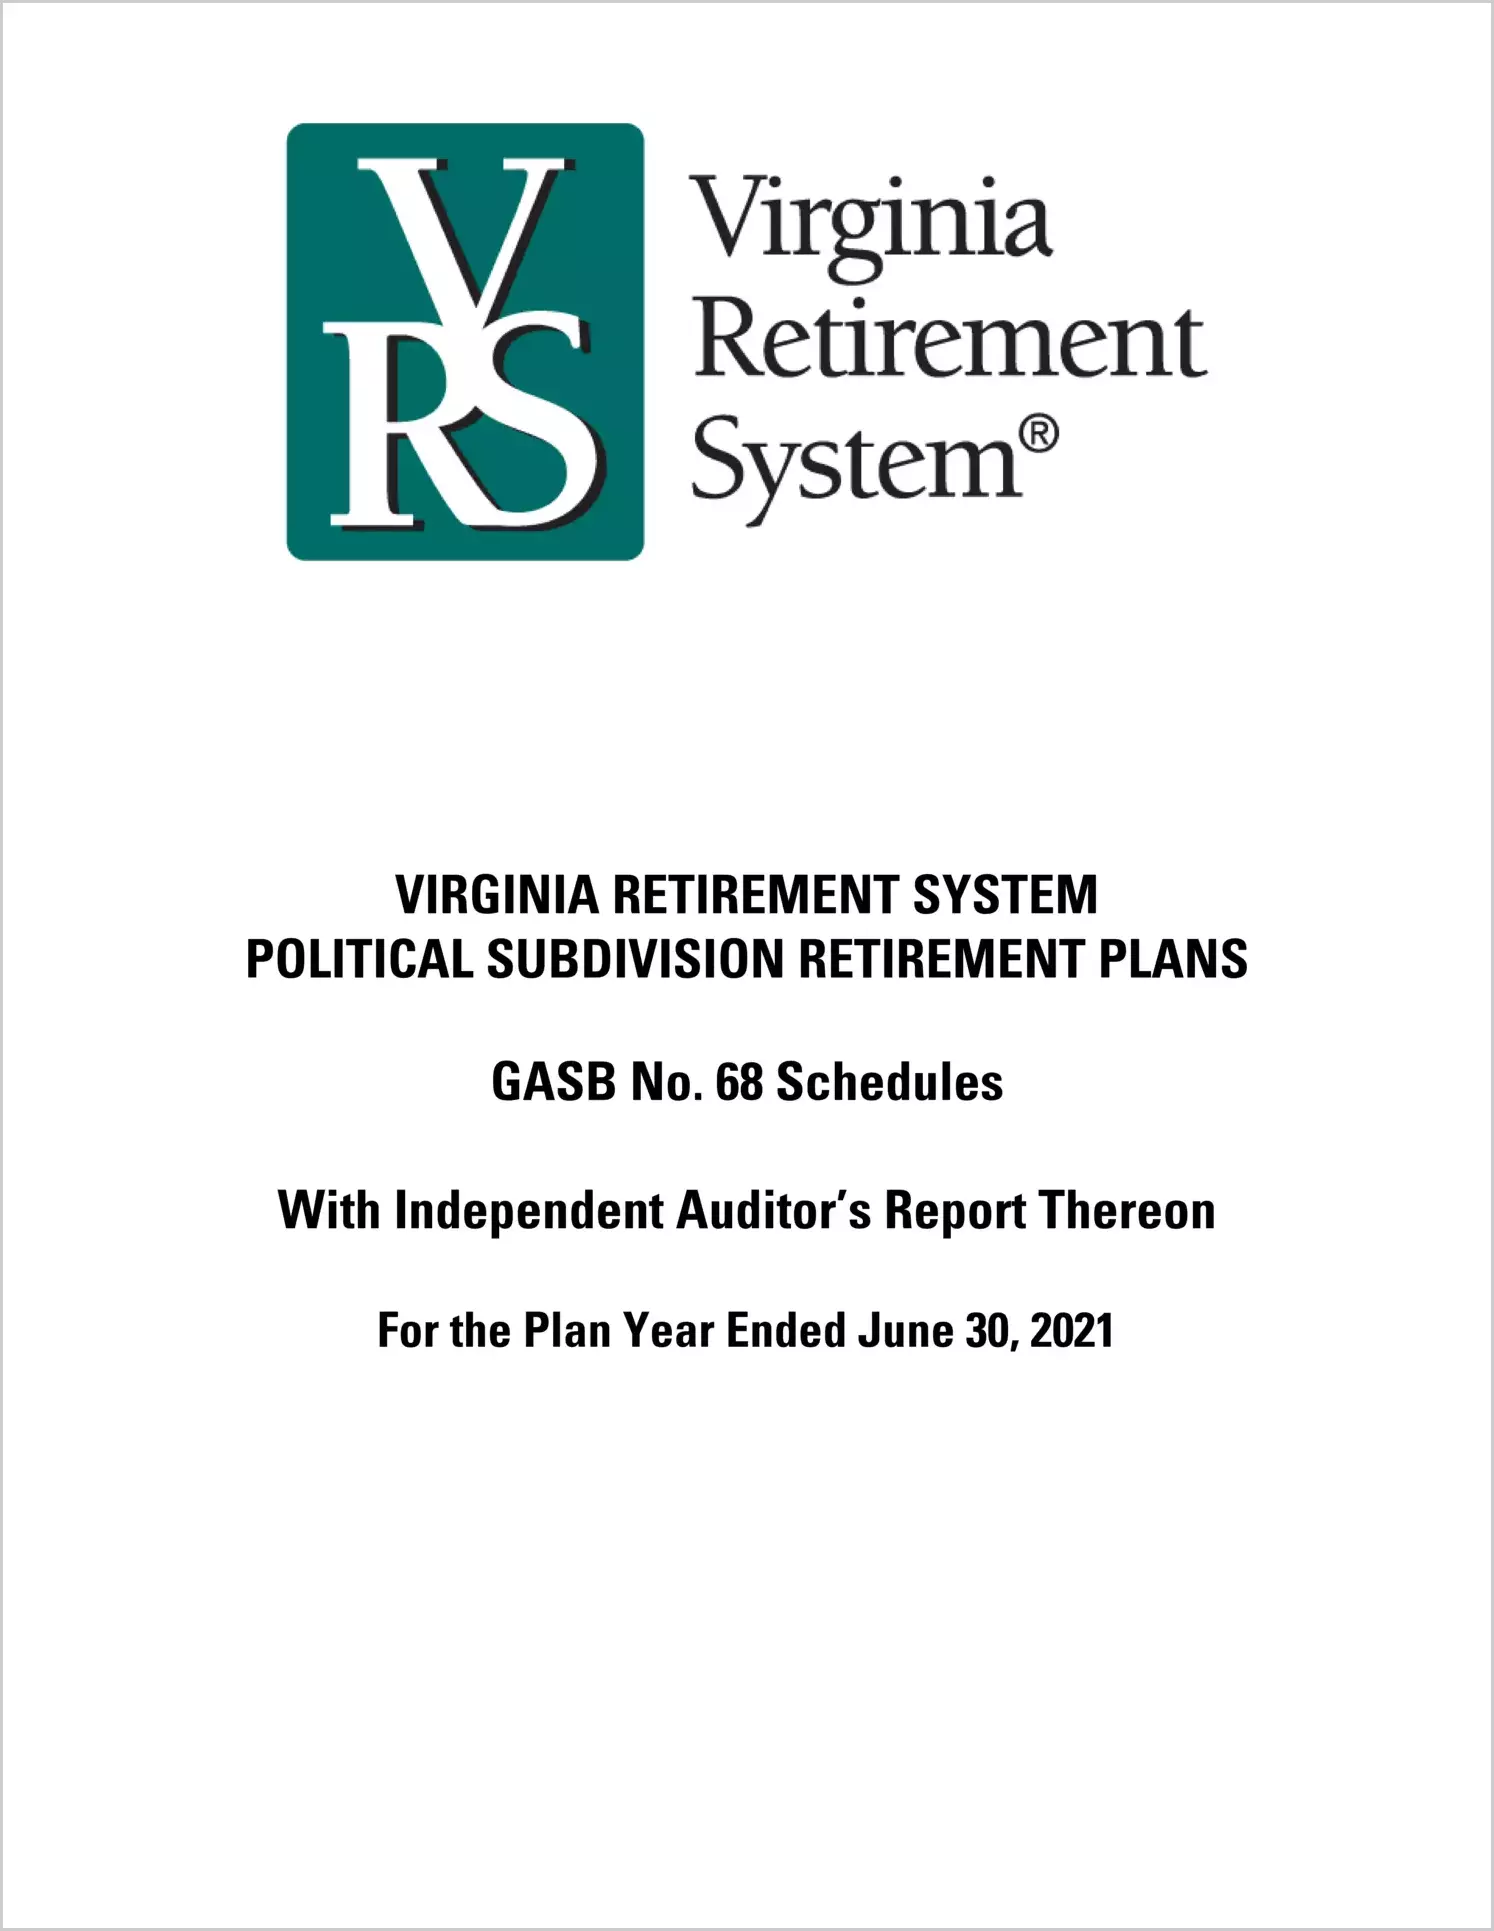 GASB 68 Schedule - Virginia Retirement System Political Subdivision Retirement Plans for the year ended June 30, 2021